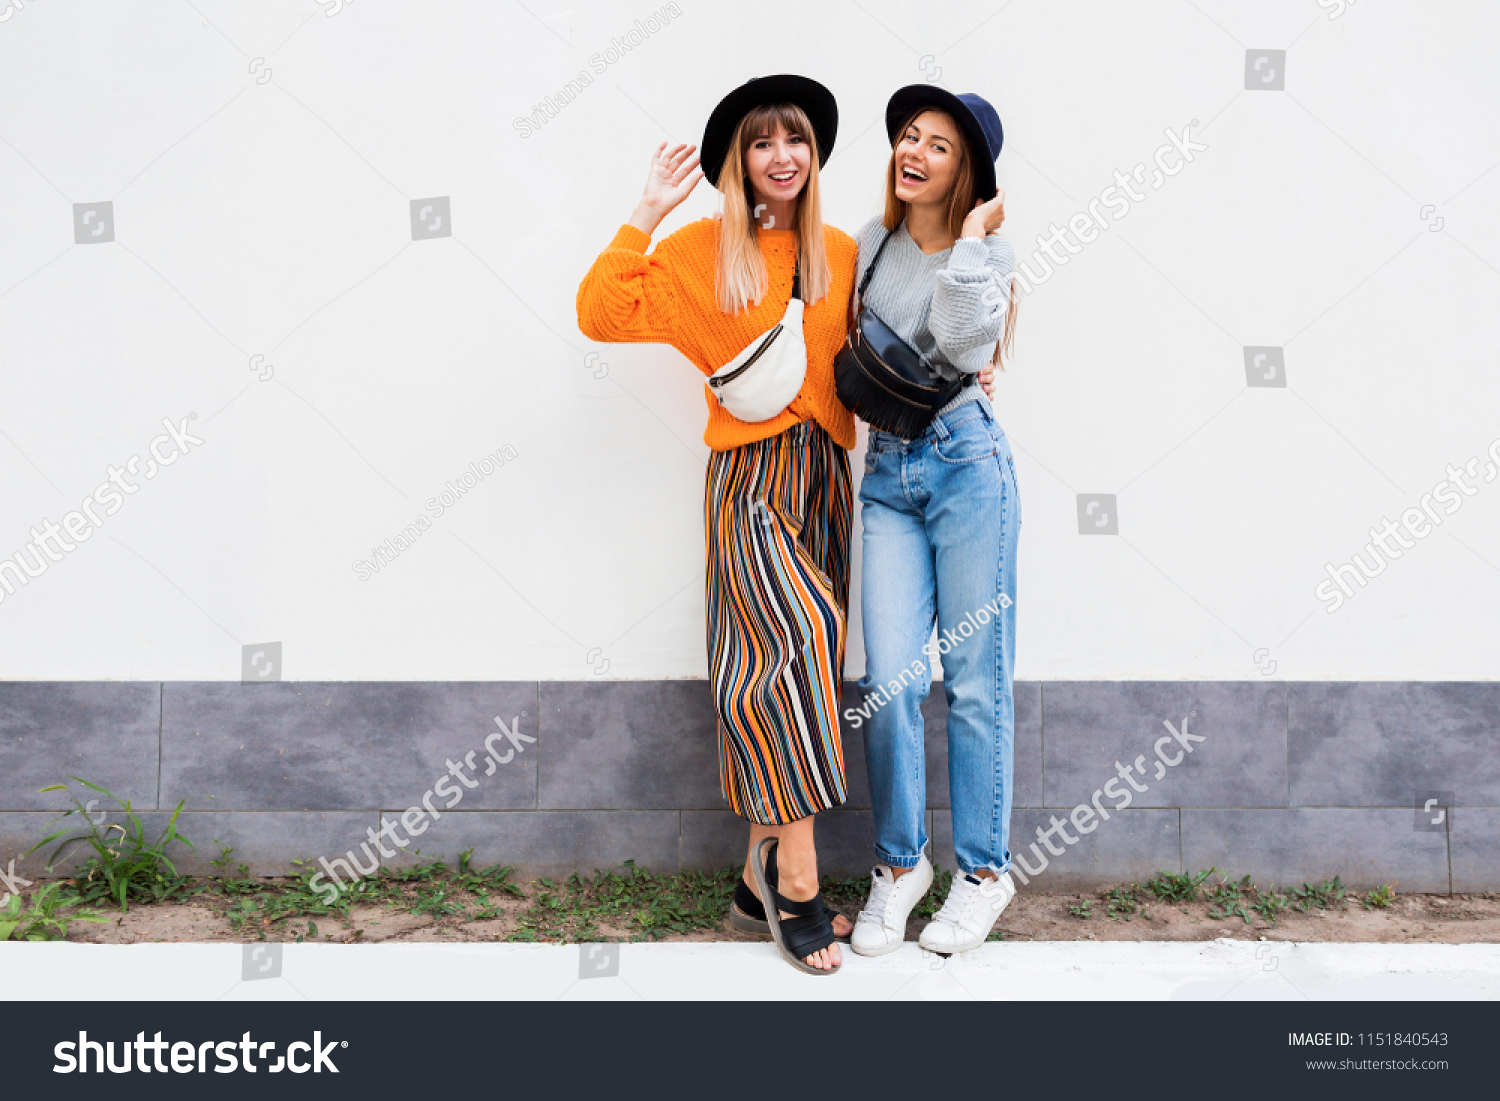 Full Height Image Two Happy Cheeky Foto Stock 1151840543 Shutterstock 